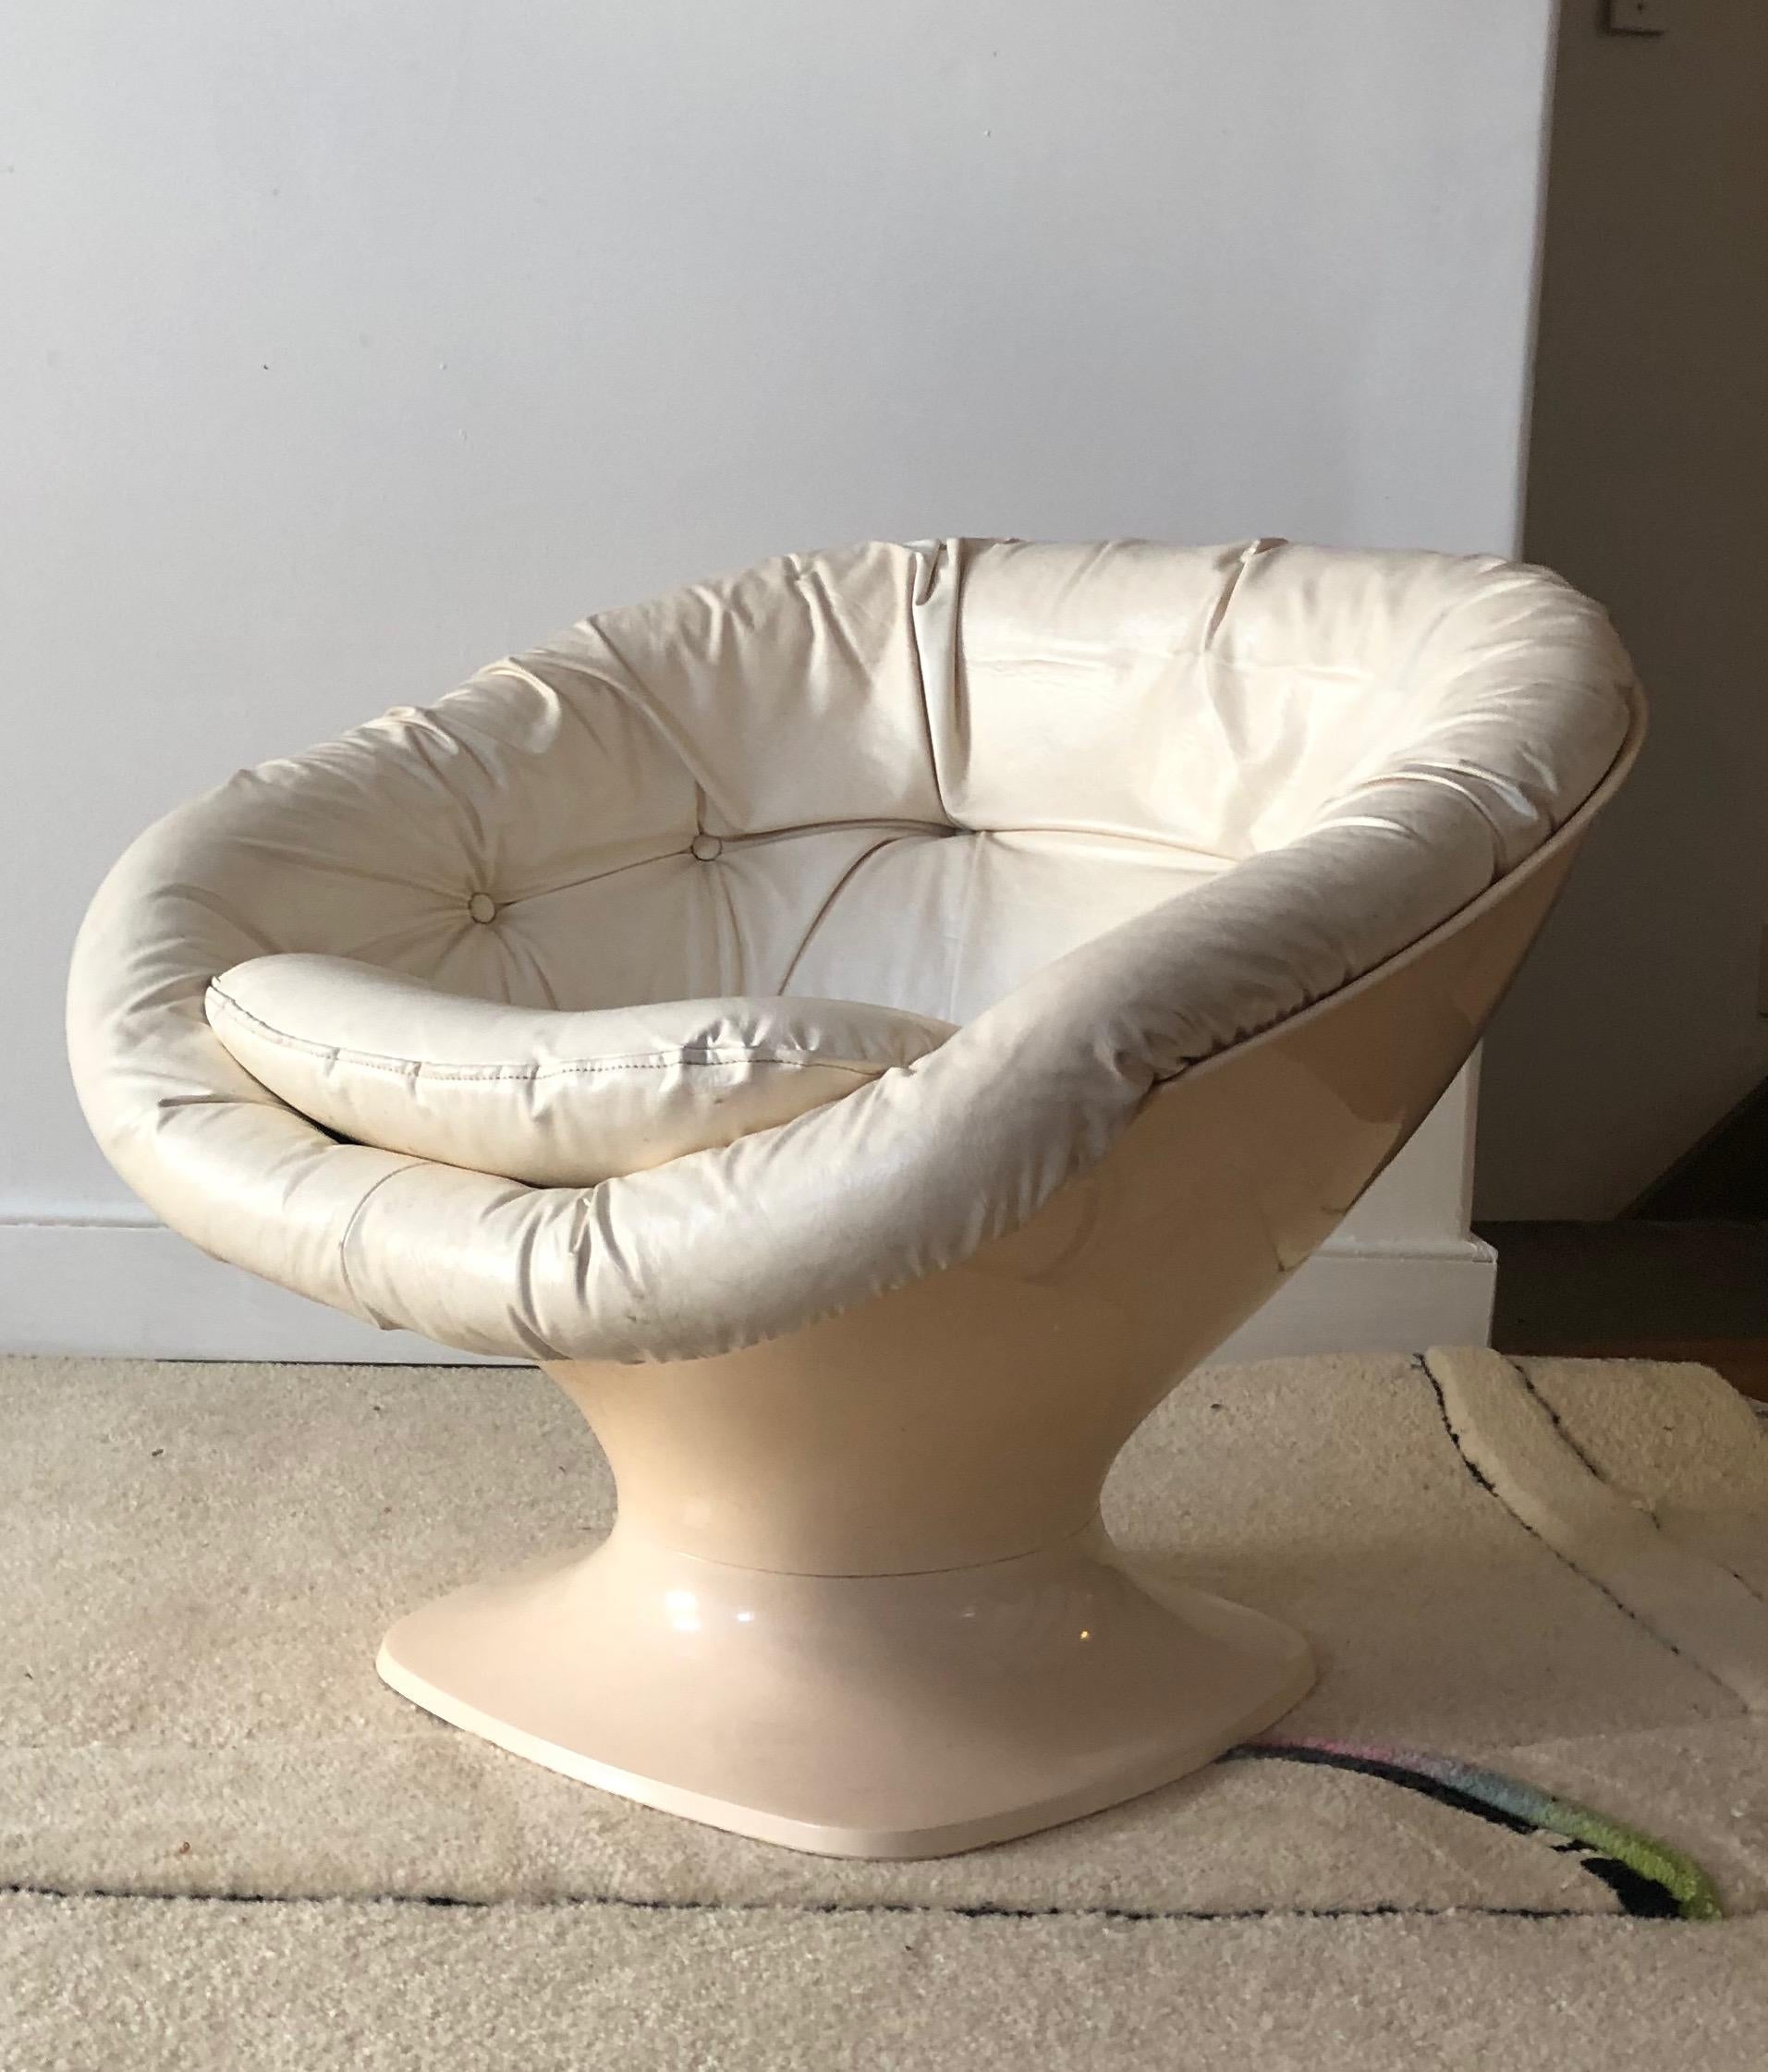 Ivory fiberglass resin club chair designed by Raphael Raffel (known as Raphaël), France, 1970s in tulip style. A rounded seat, original leatherette upholstery. This listing is for one off-white chair. The yellow chairs are sold.

Raphaël Raffel,